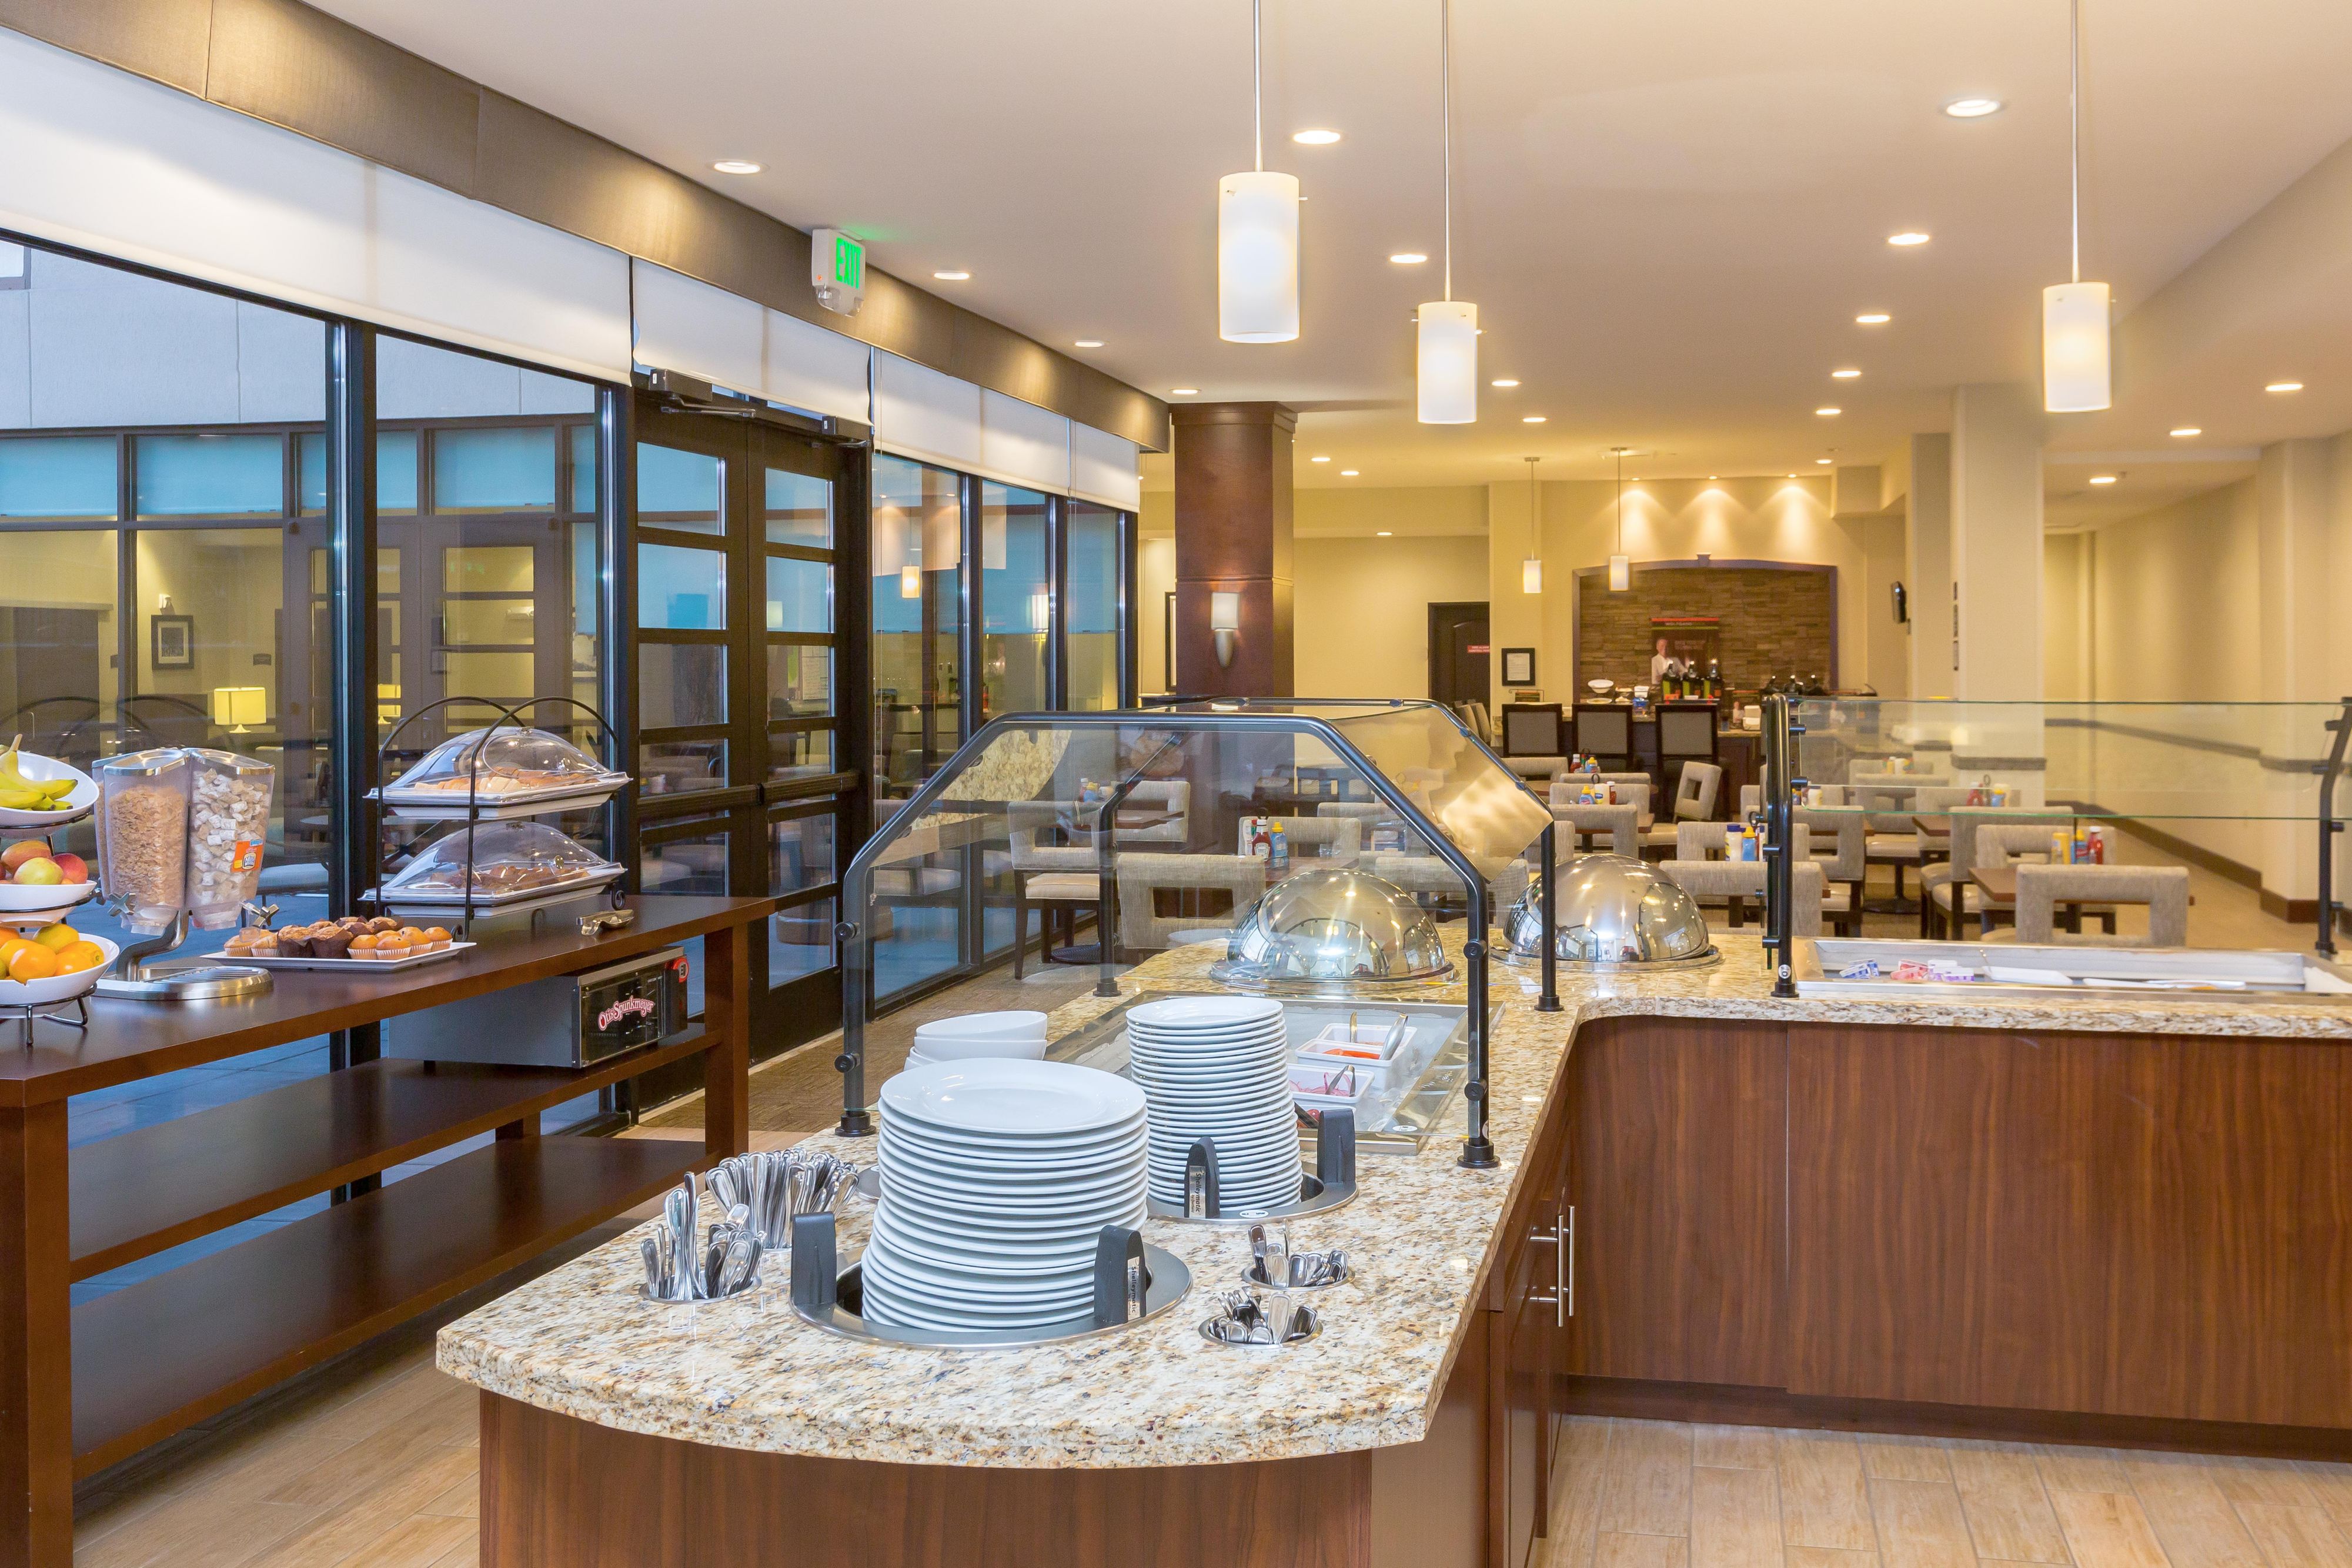 Stay and enjoy our complimentary hot breakfast buffet, available weekdays from 6:30 am – 9:30 am and weekends 7:30 am – 10:30 am. Our rotating menu will give you a variety of options to meet all your needs!